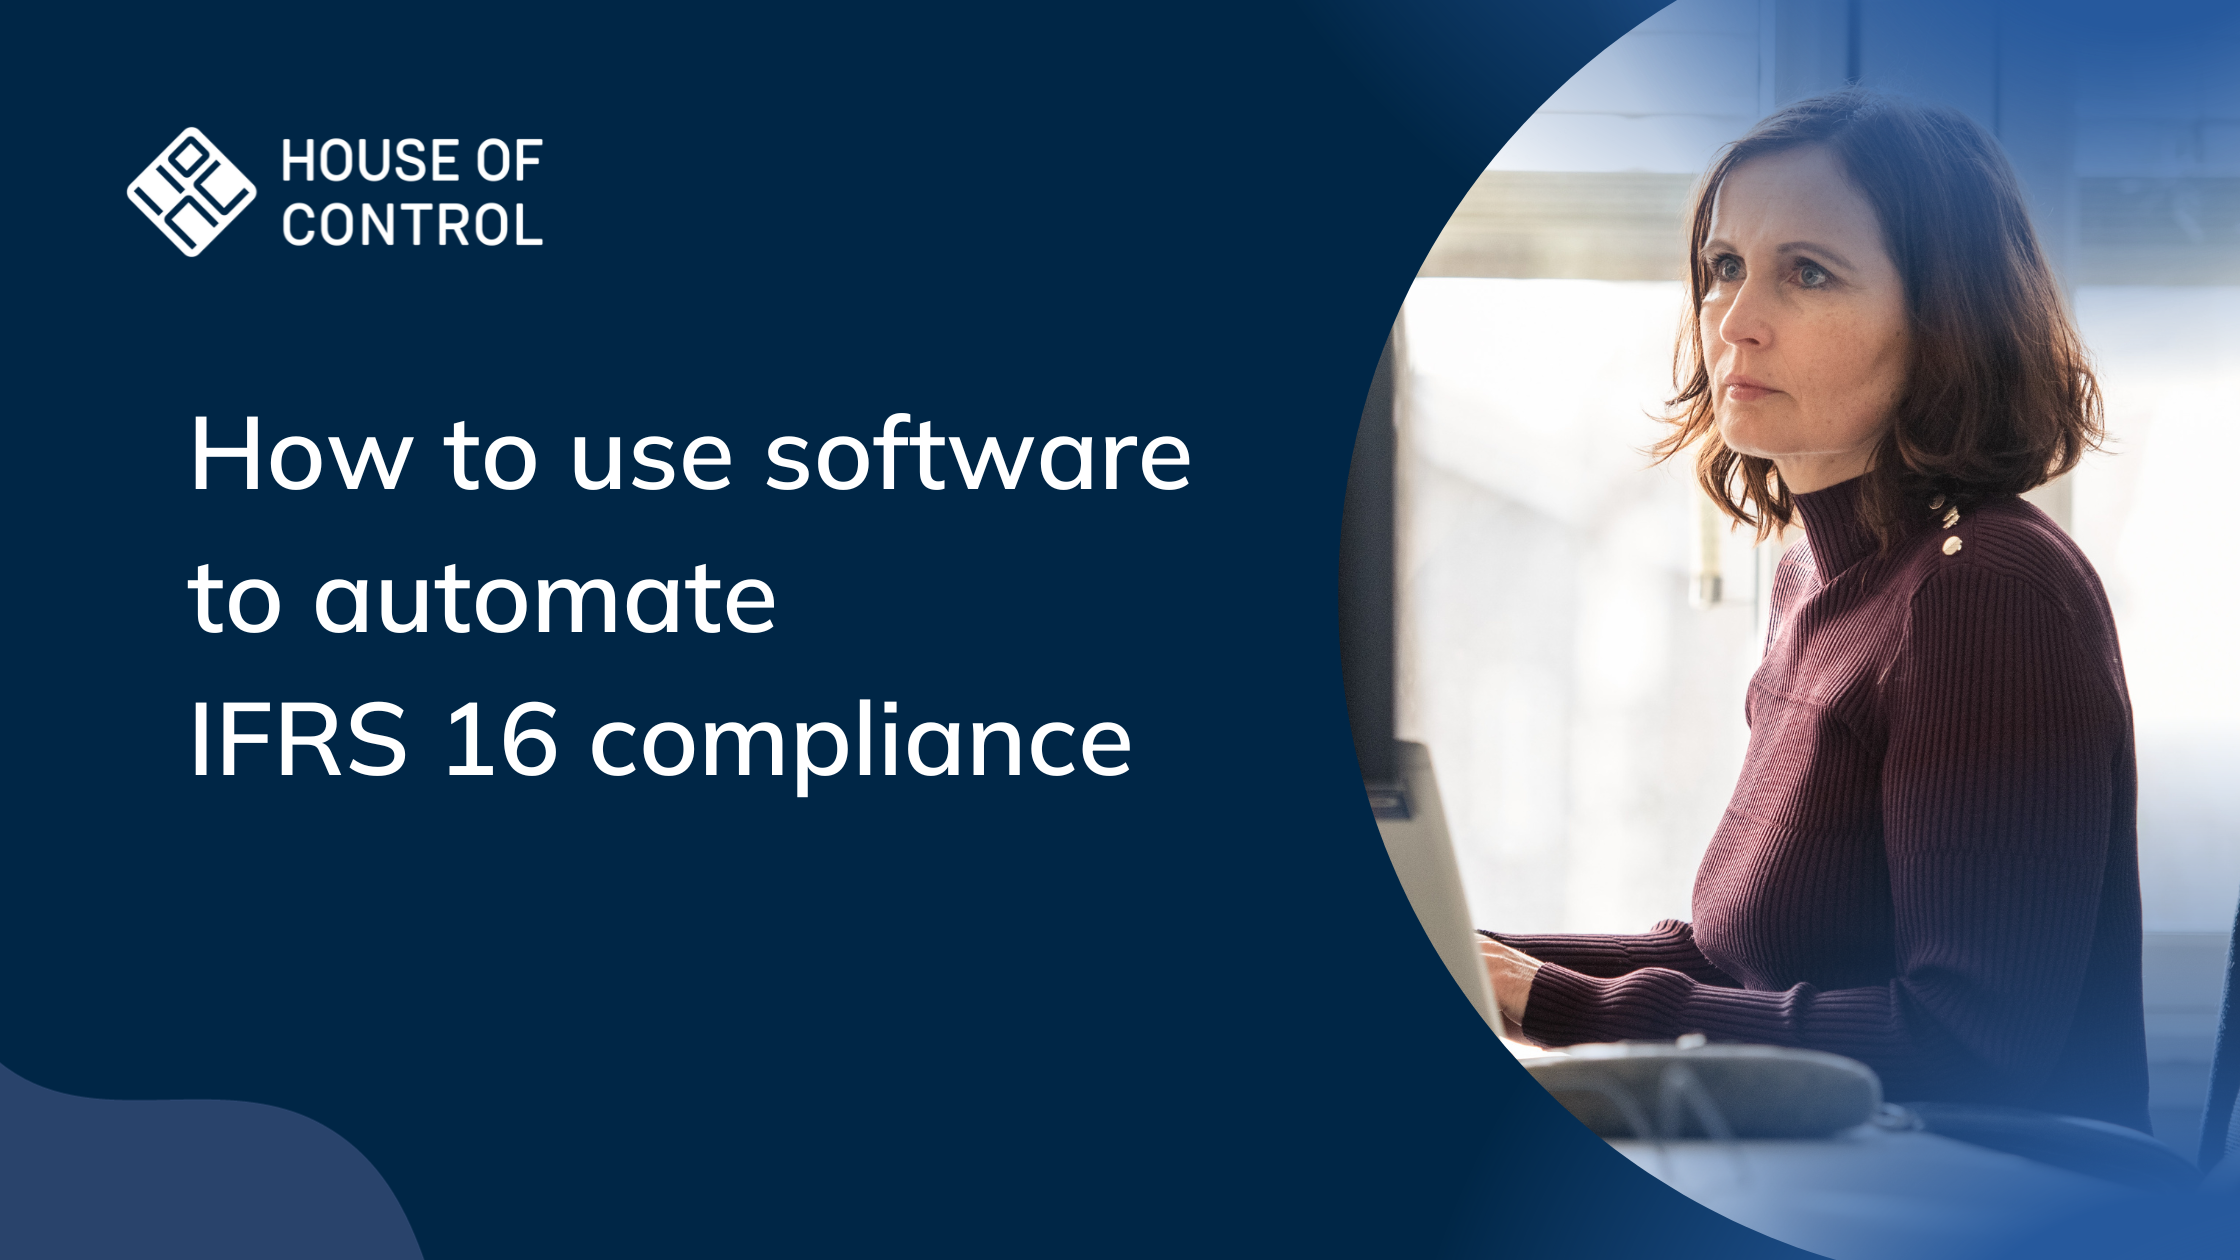 How to use software to automate IFRS 16 compliance
